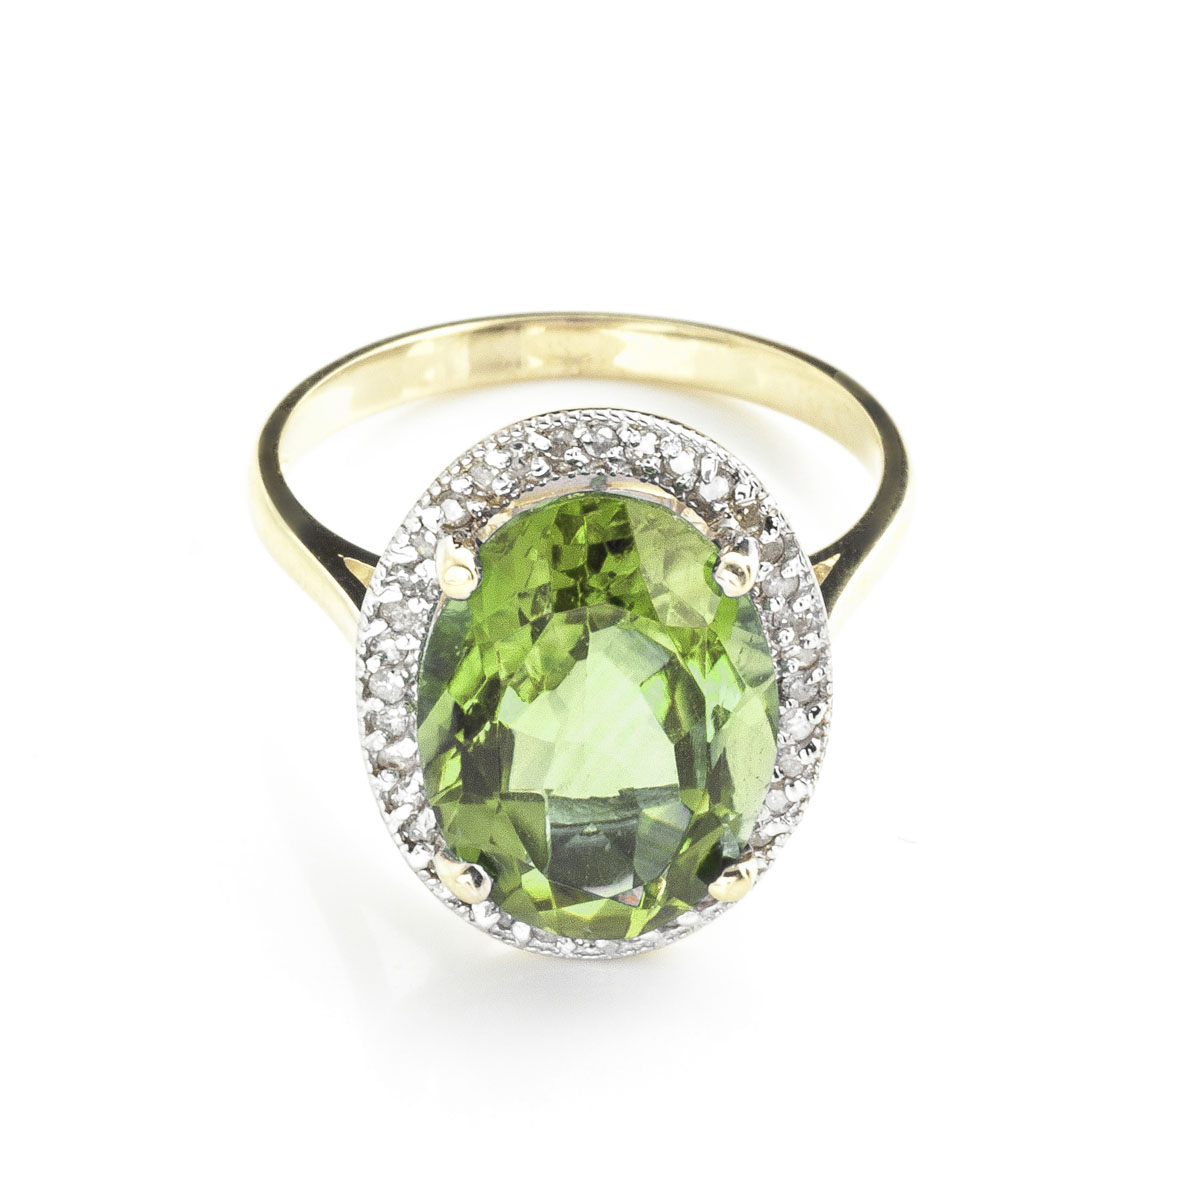 Green Amethyst Halo Ring 5.28 ctw in 18ct Gold